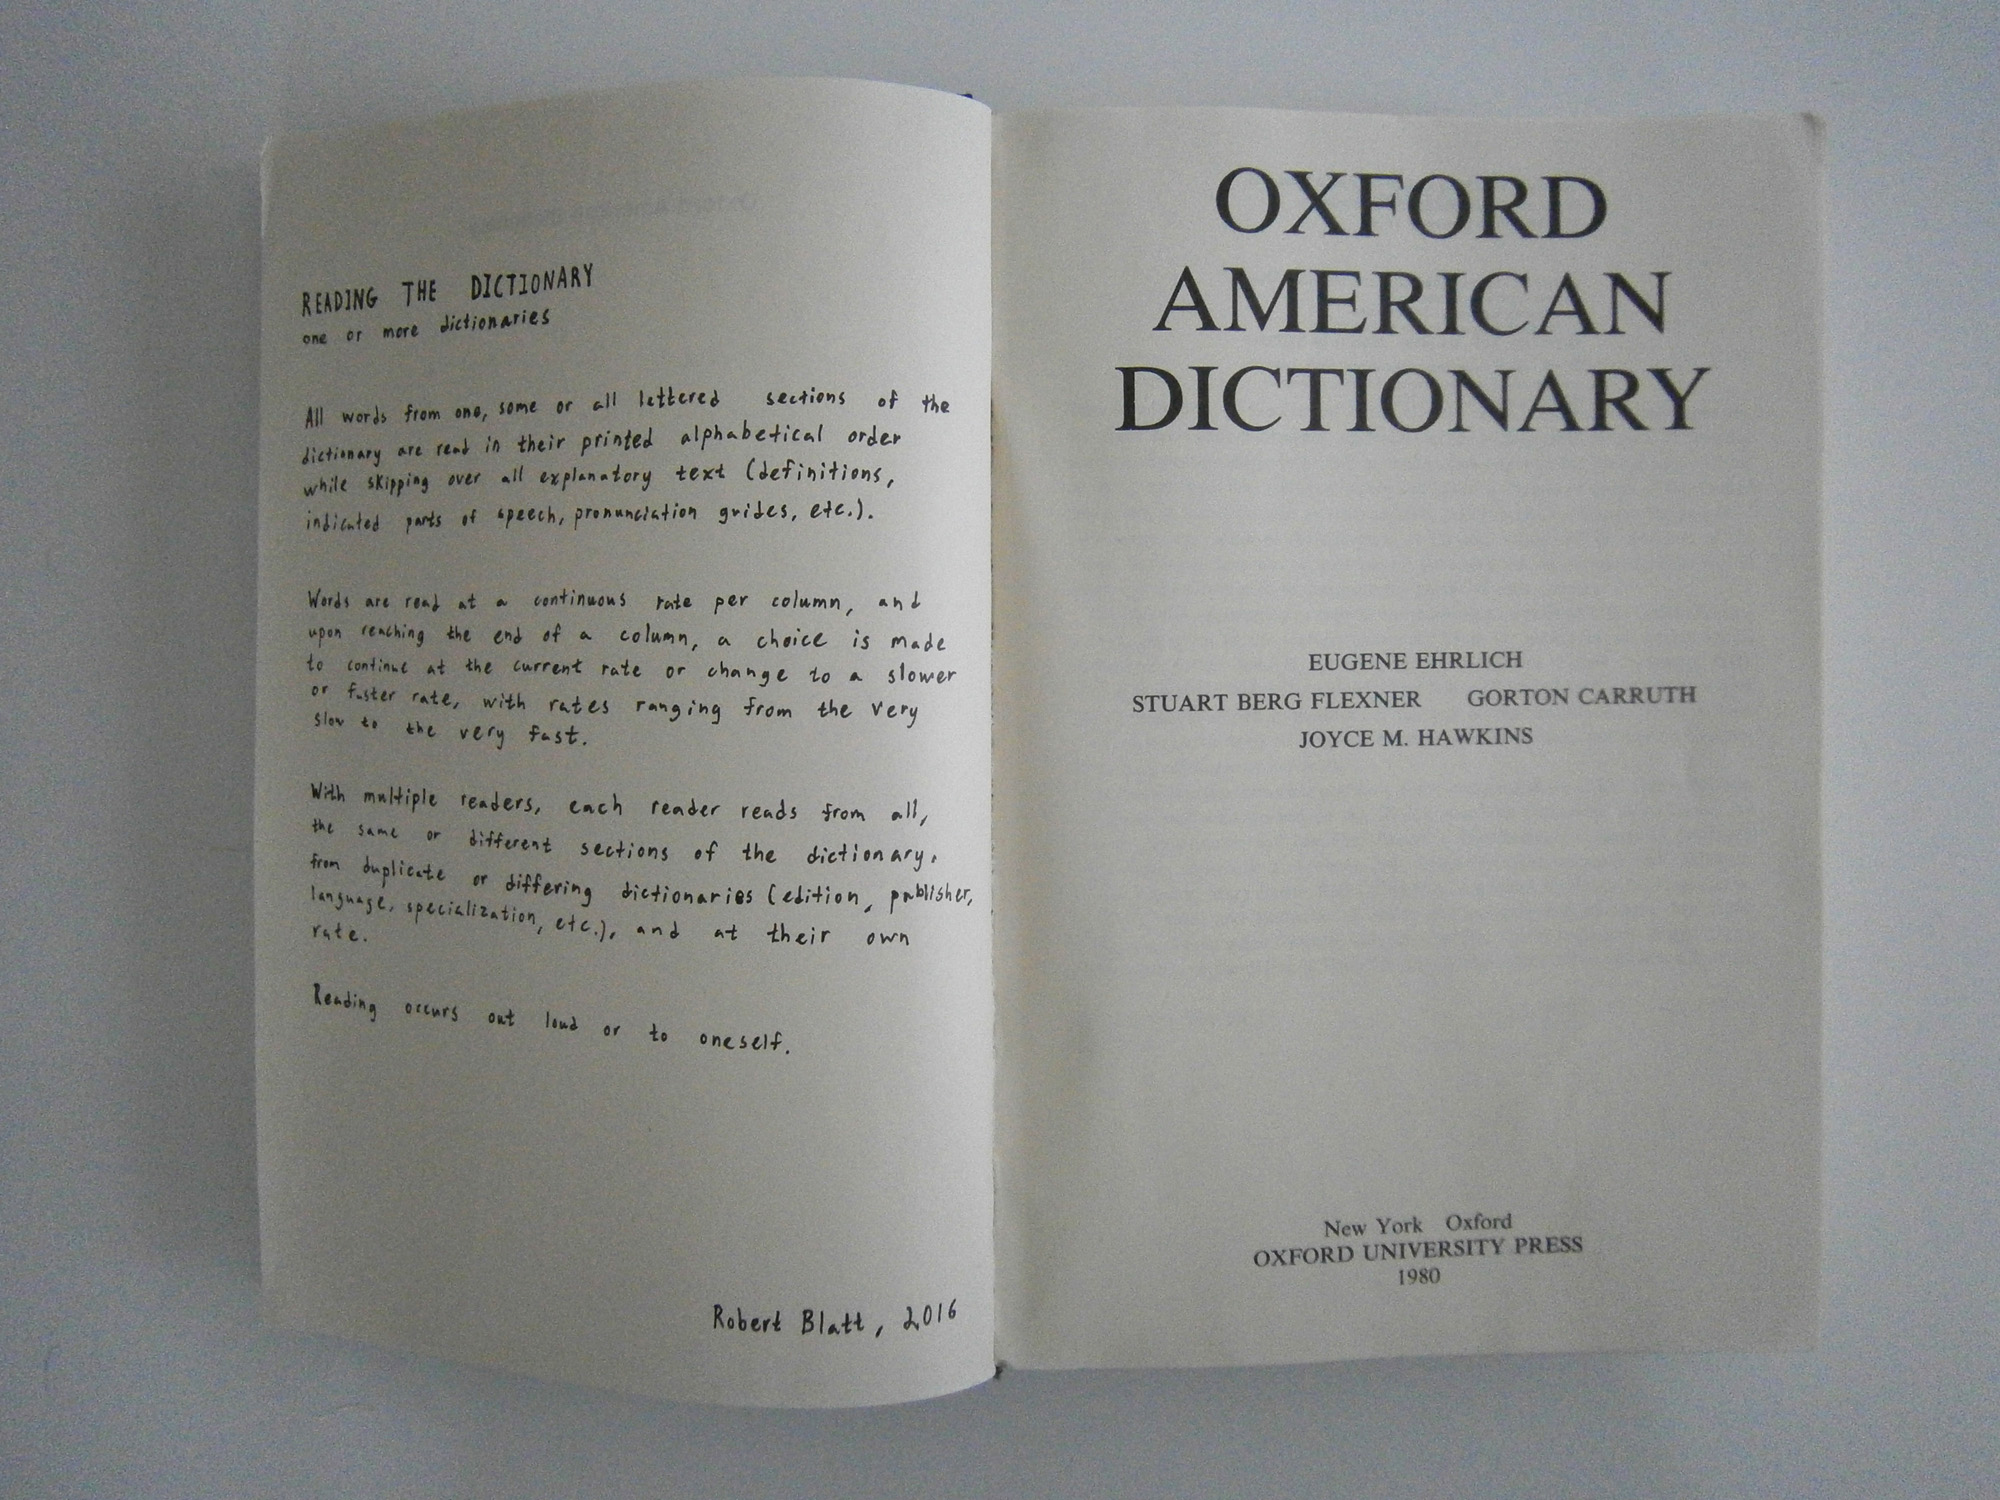 Reading The Dictionary by Robert Blatt, Oxford American Dictionary